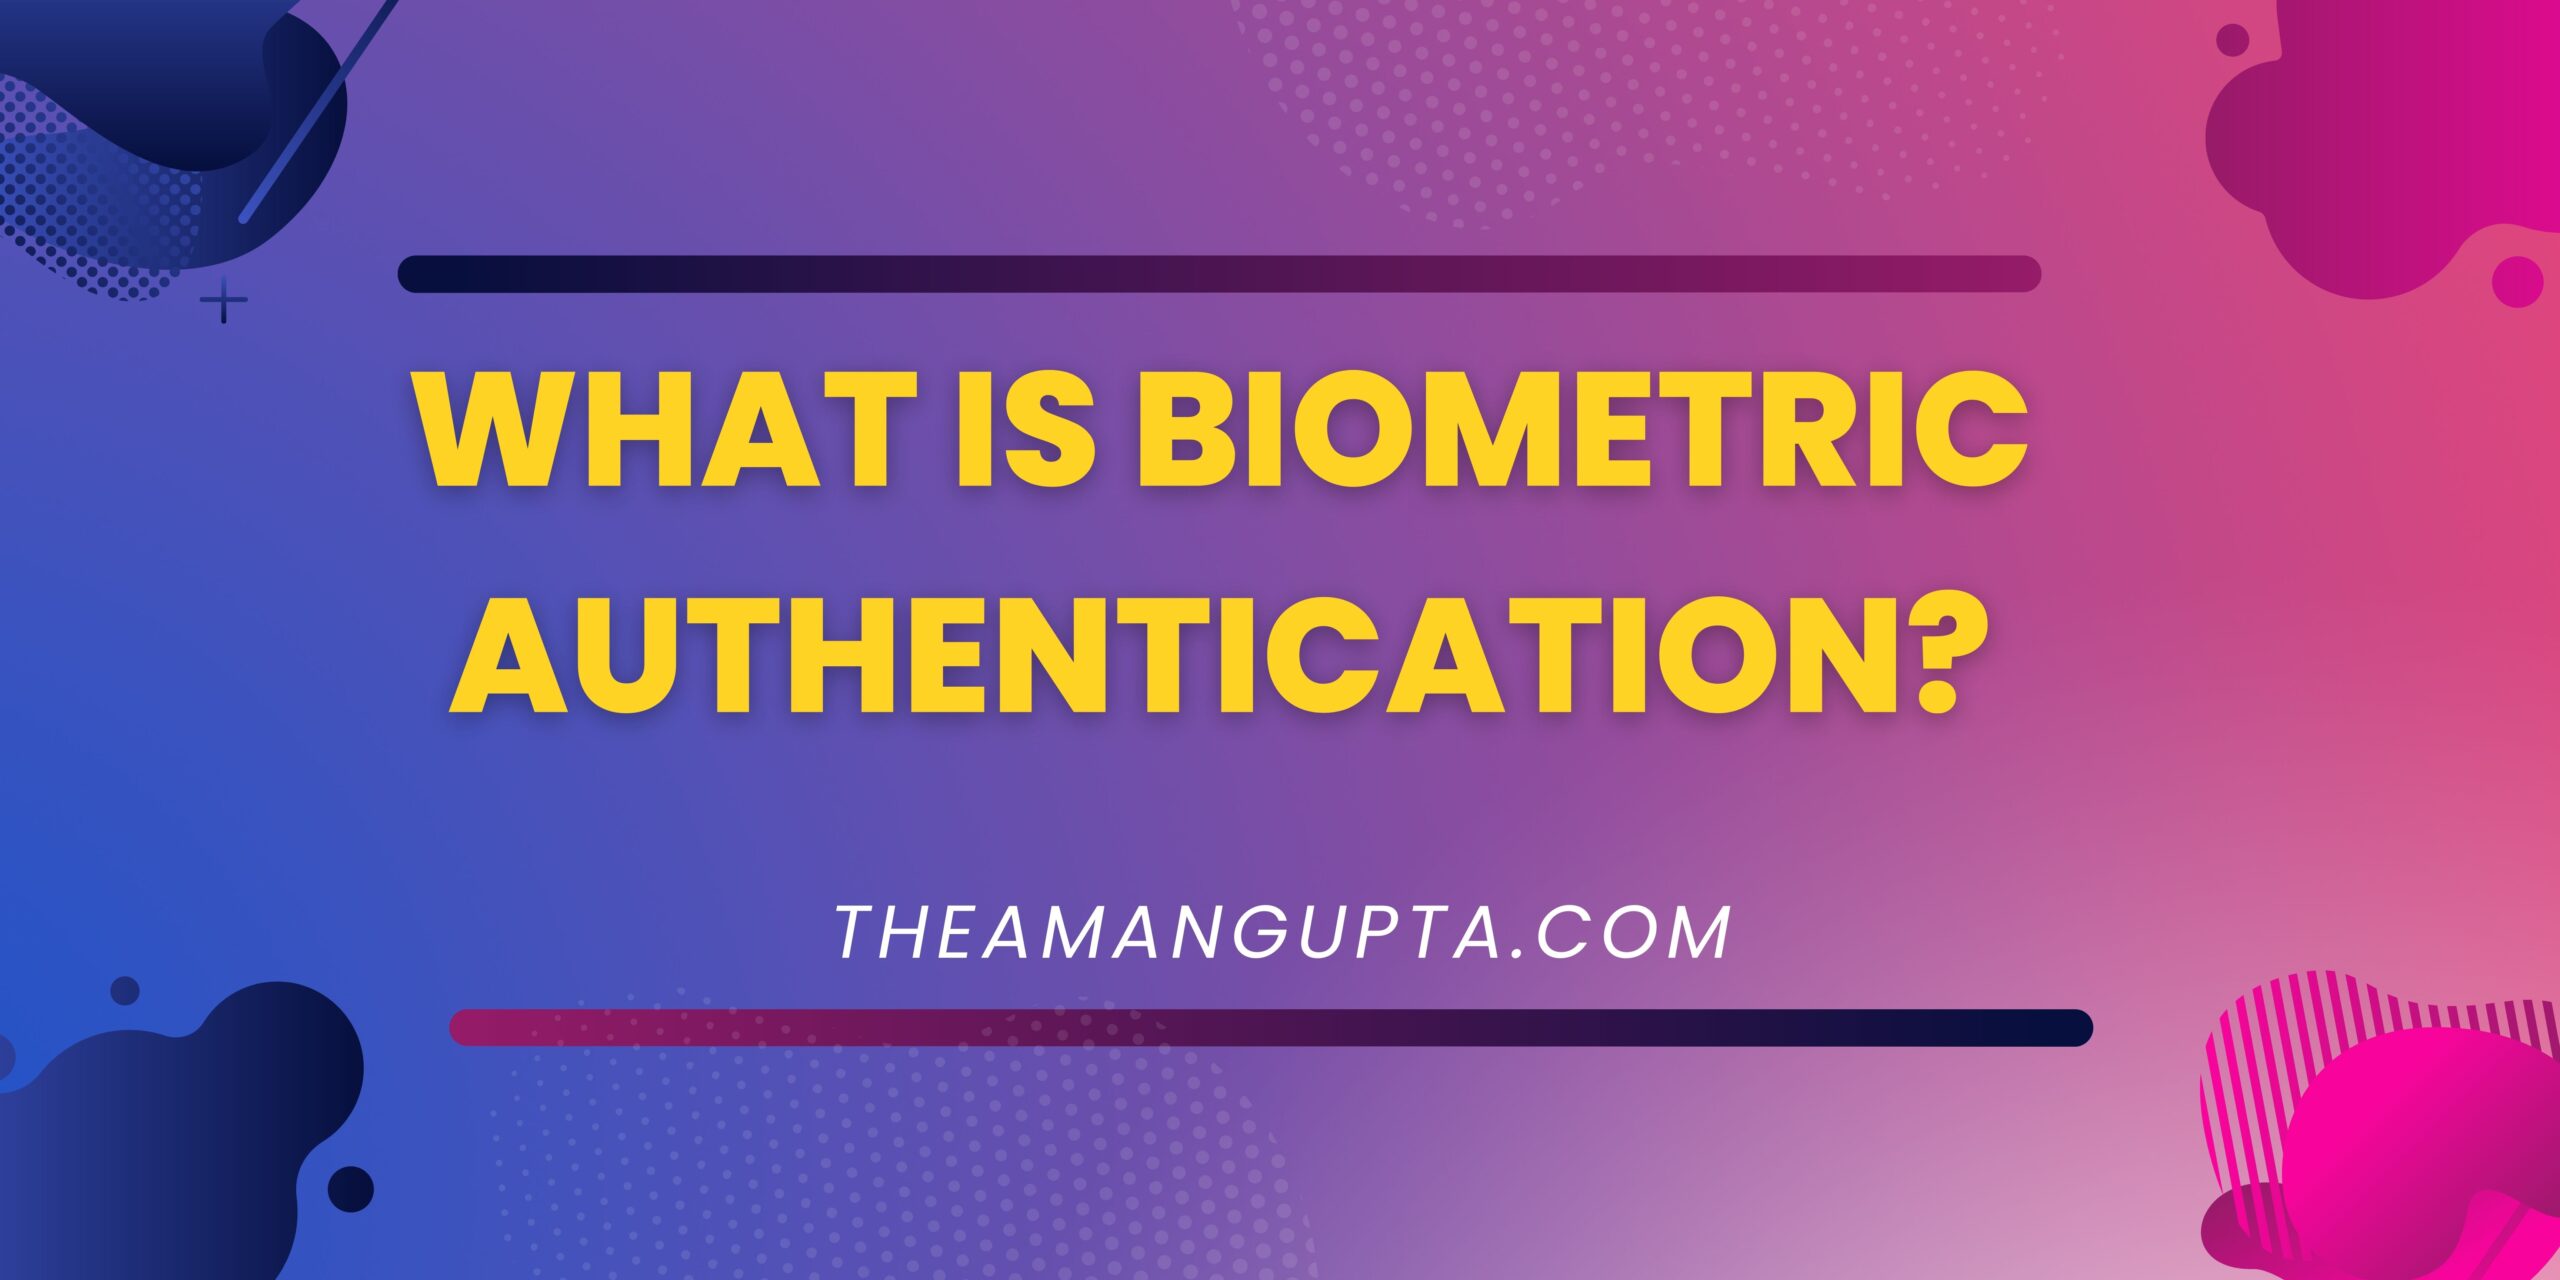 What Is Biometric Authentication|Biometric Authentication|Theamangupta|Theamangupta